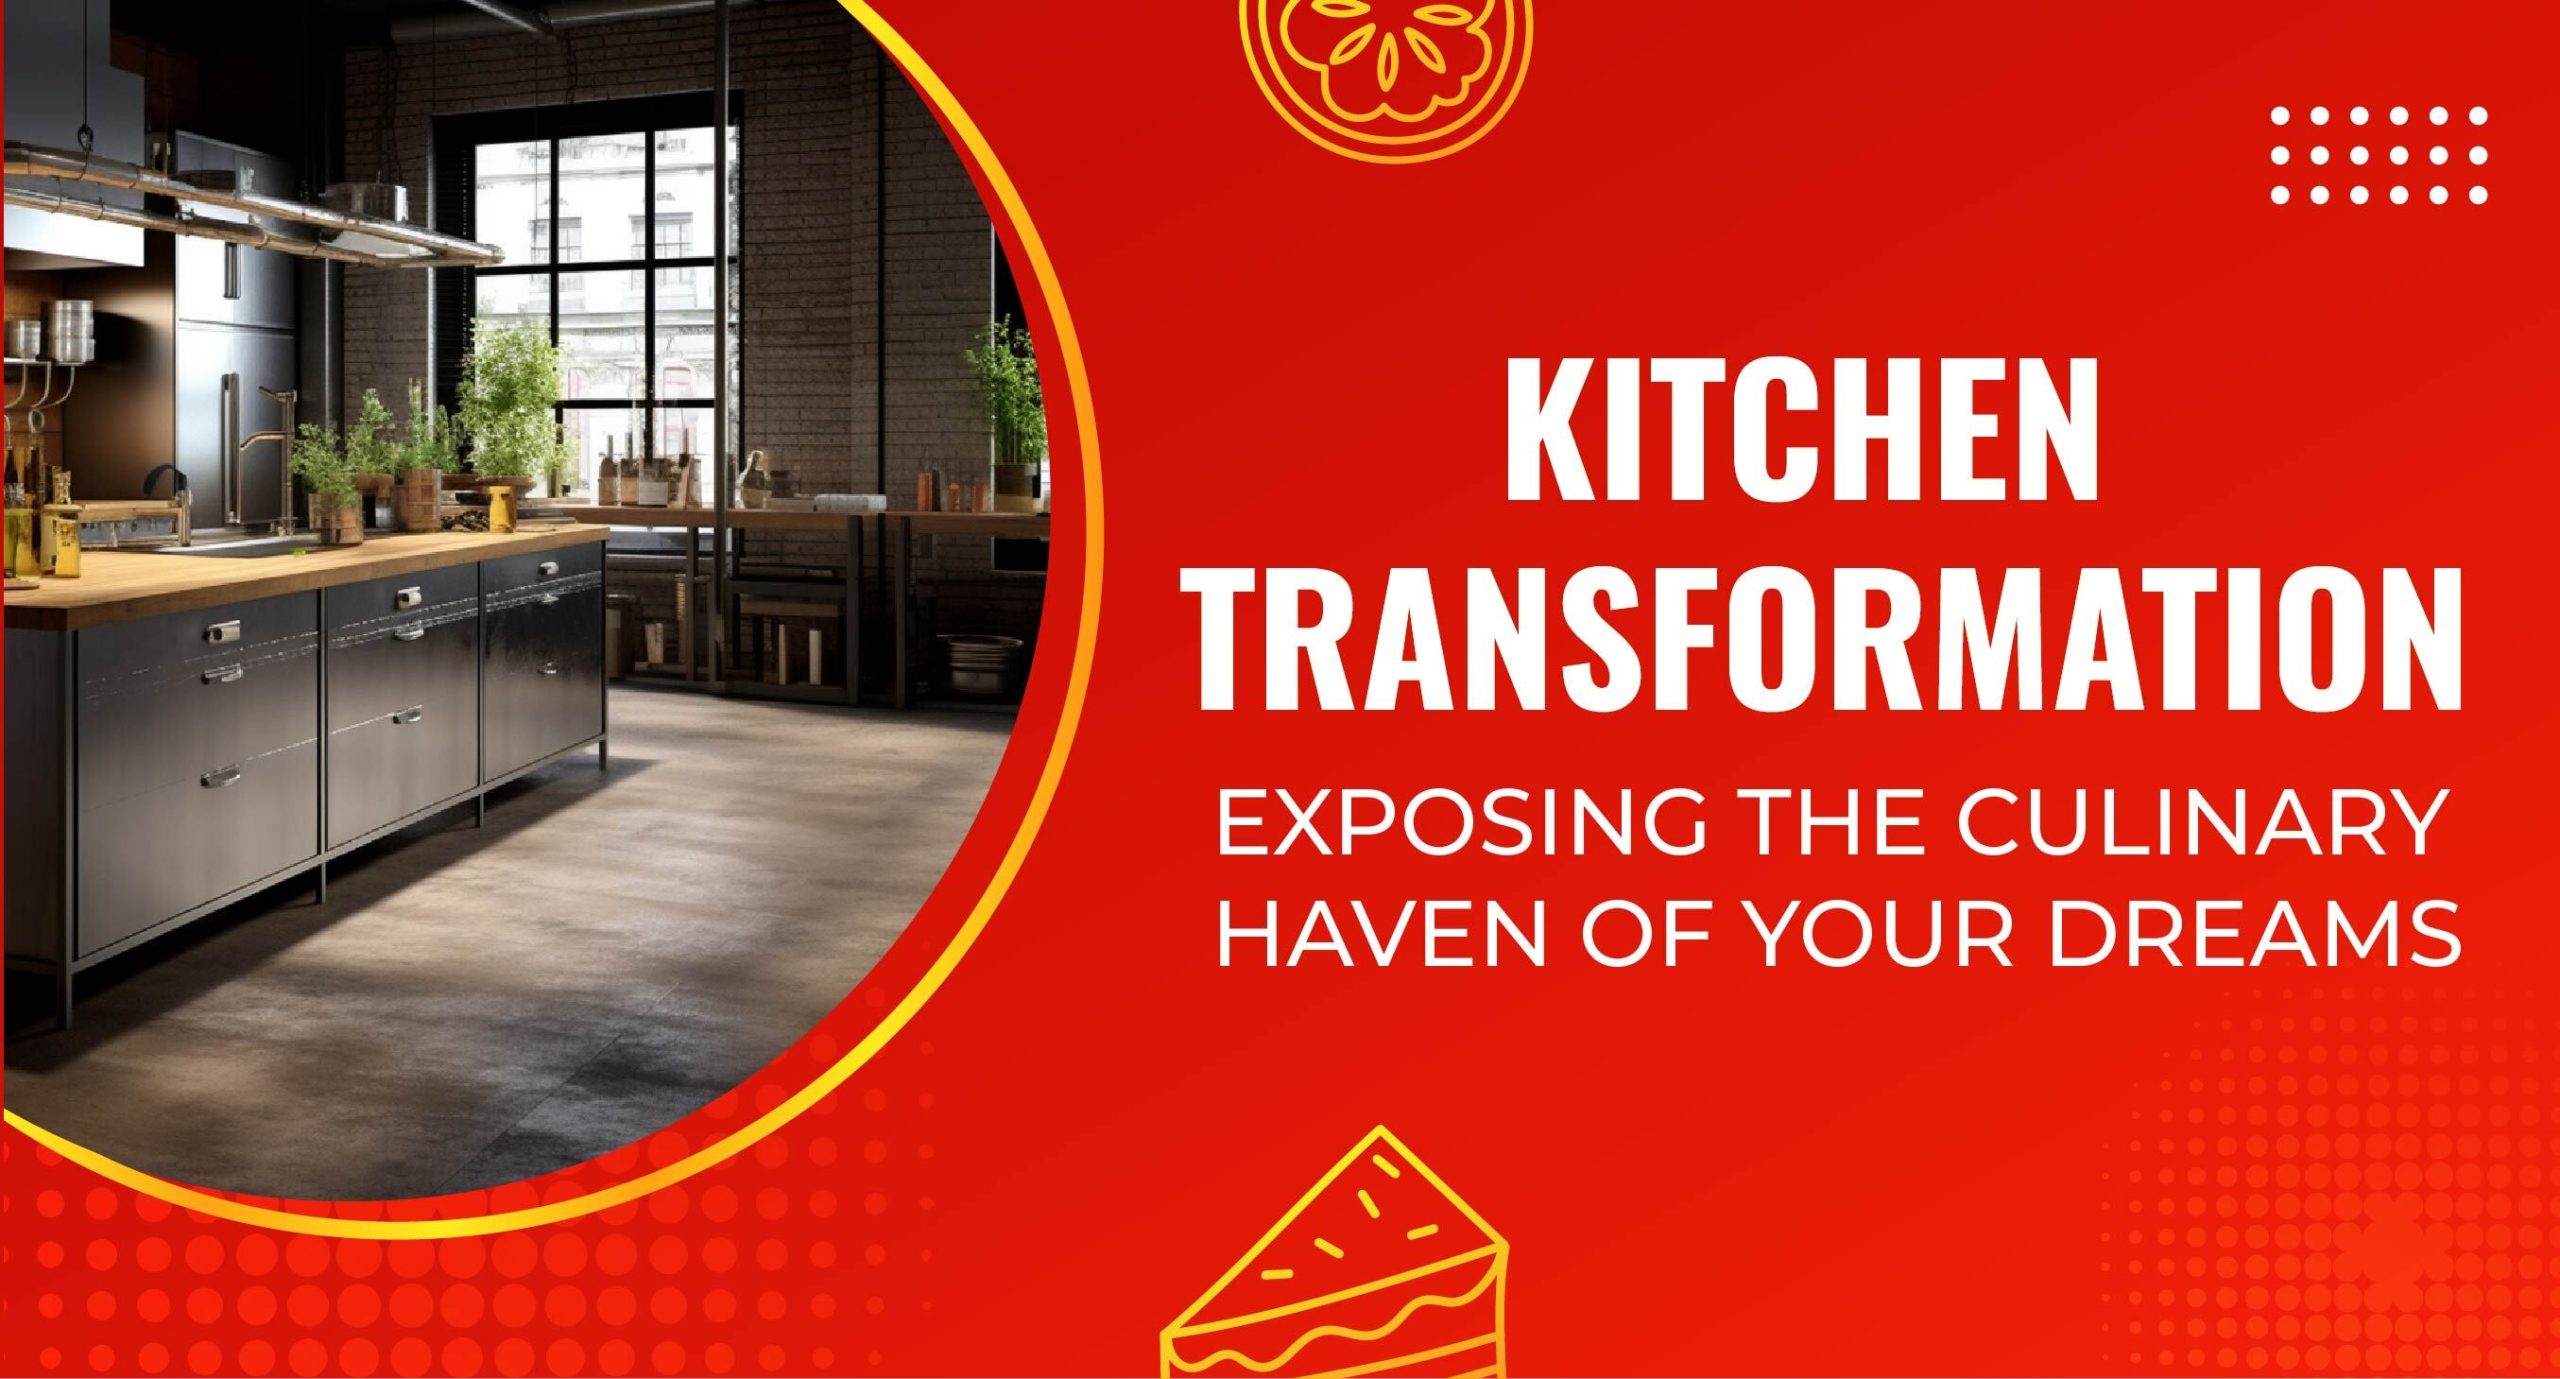 Kitchen Transformation Exposing the Culinary Haven of Your Dreams